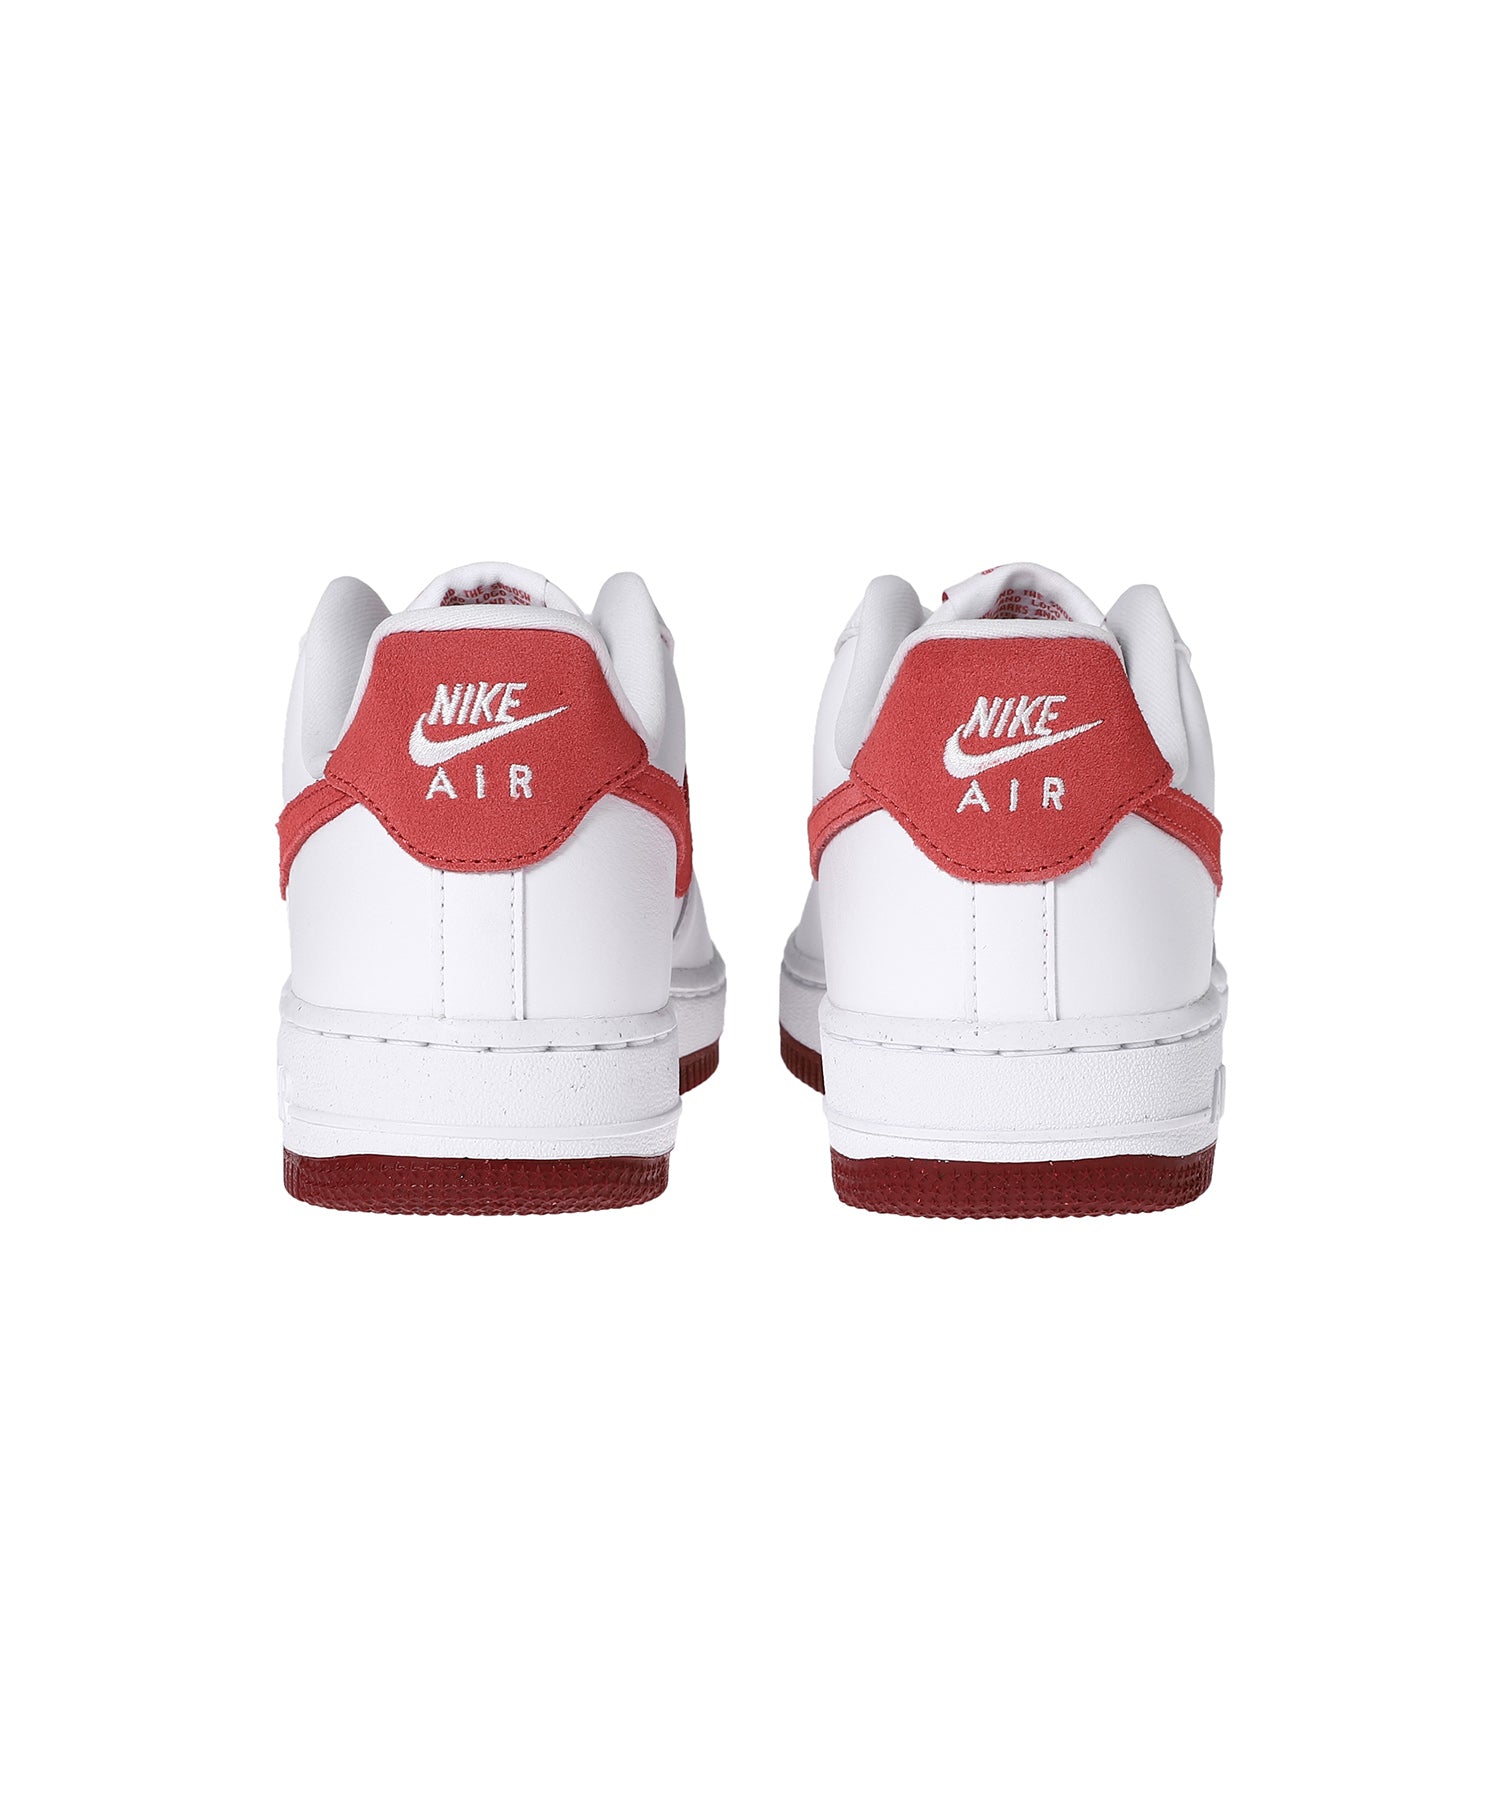 Wmns Air Force 1 '07 Valentine’s Day Pack